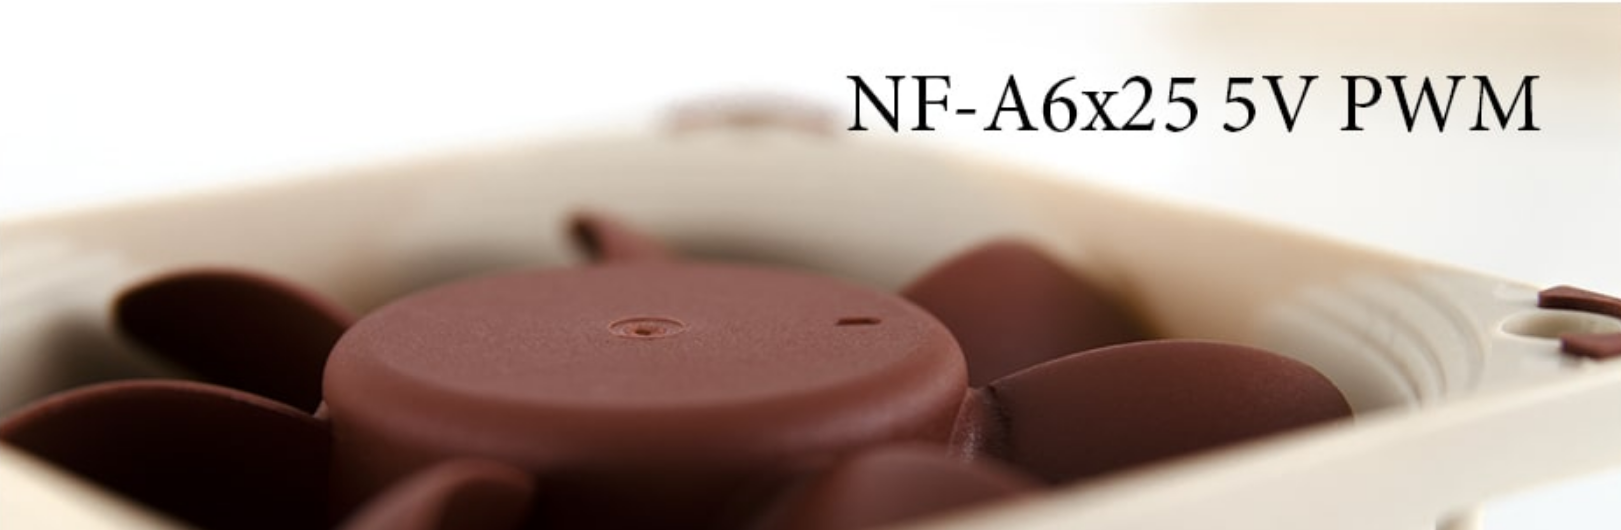 A large marketing image providing additional information about the product Noctua NF-A6X25 5V PWM 60mm x 25mm 3000RPM Cooling Fan - Additional alt info not provided